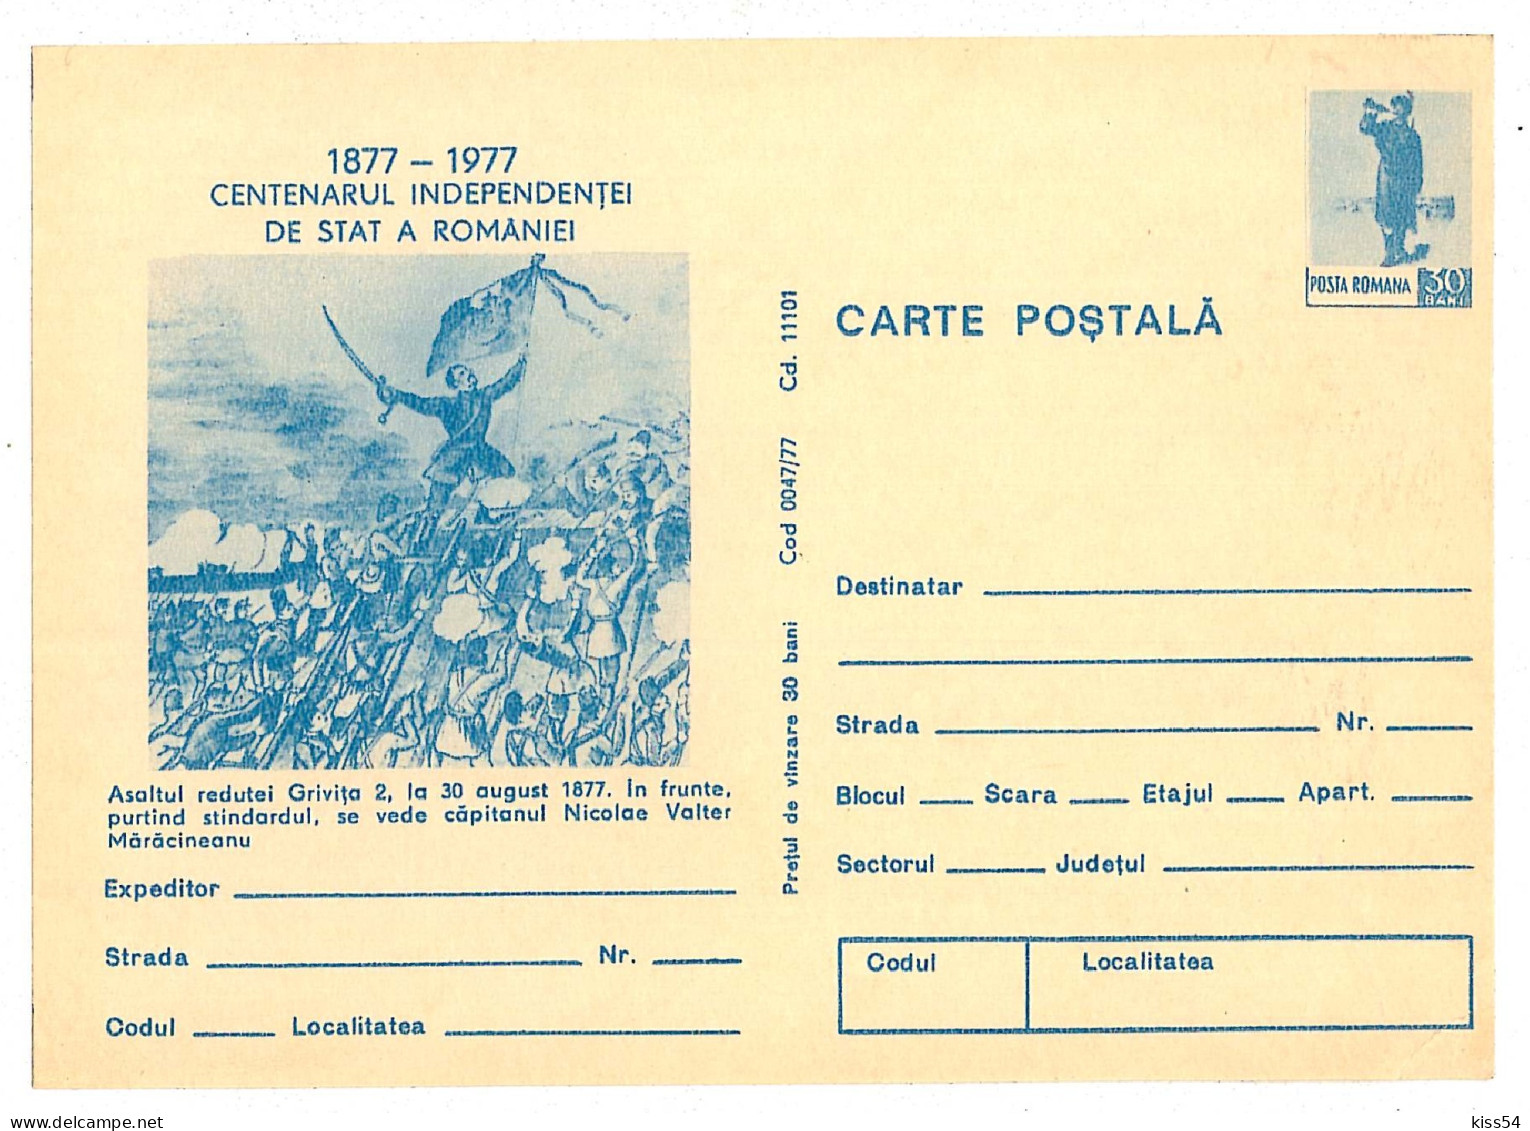 IP 77 A - 47 Centenary Independence Of Romania - Stationery - Unused - 1977 - Postal Stationery